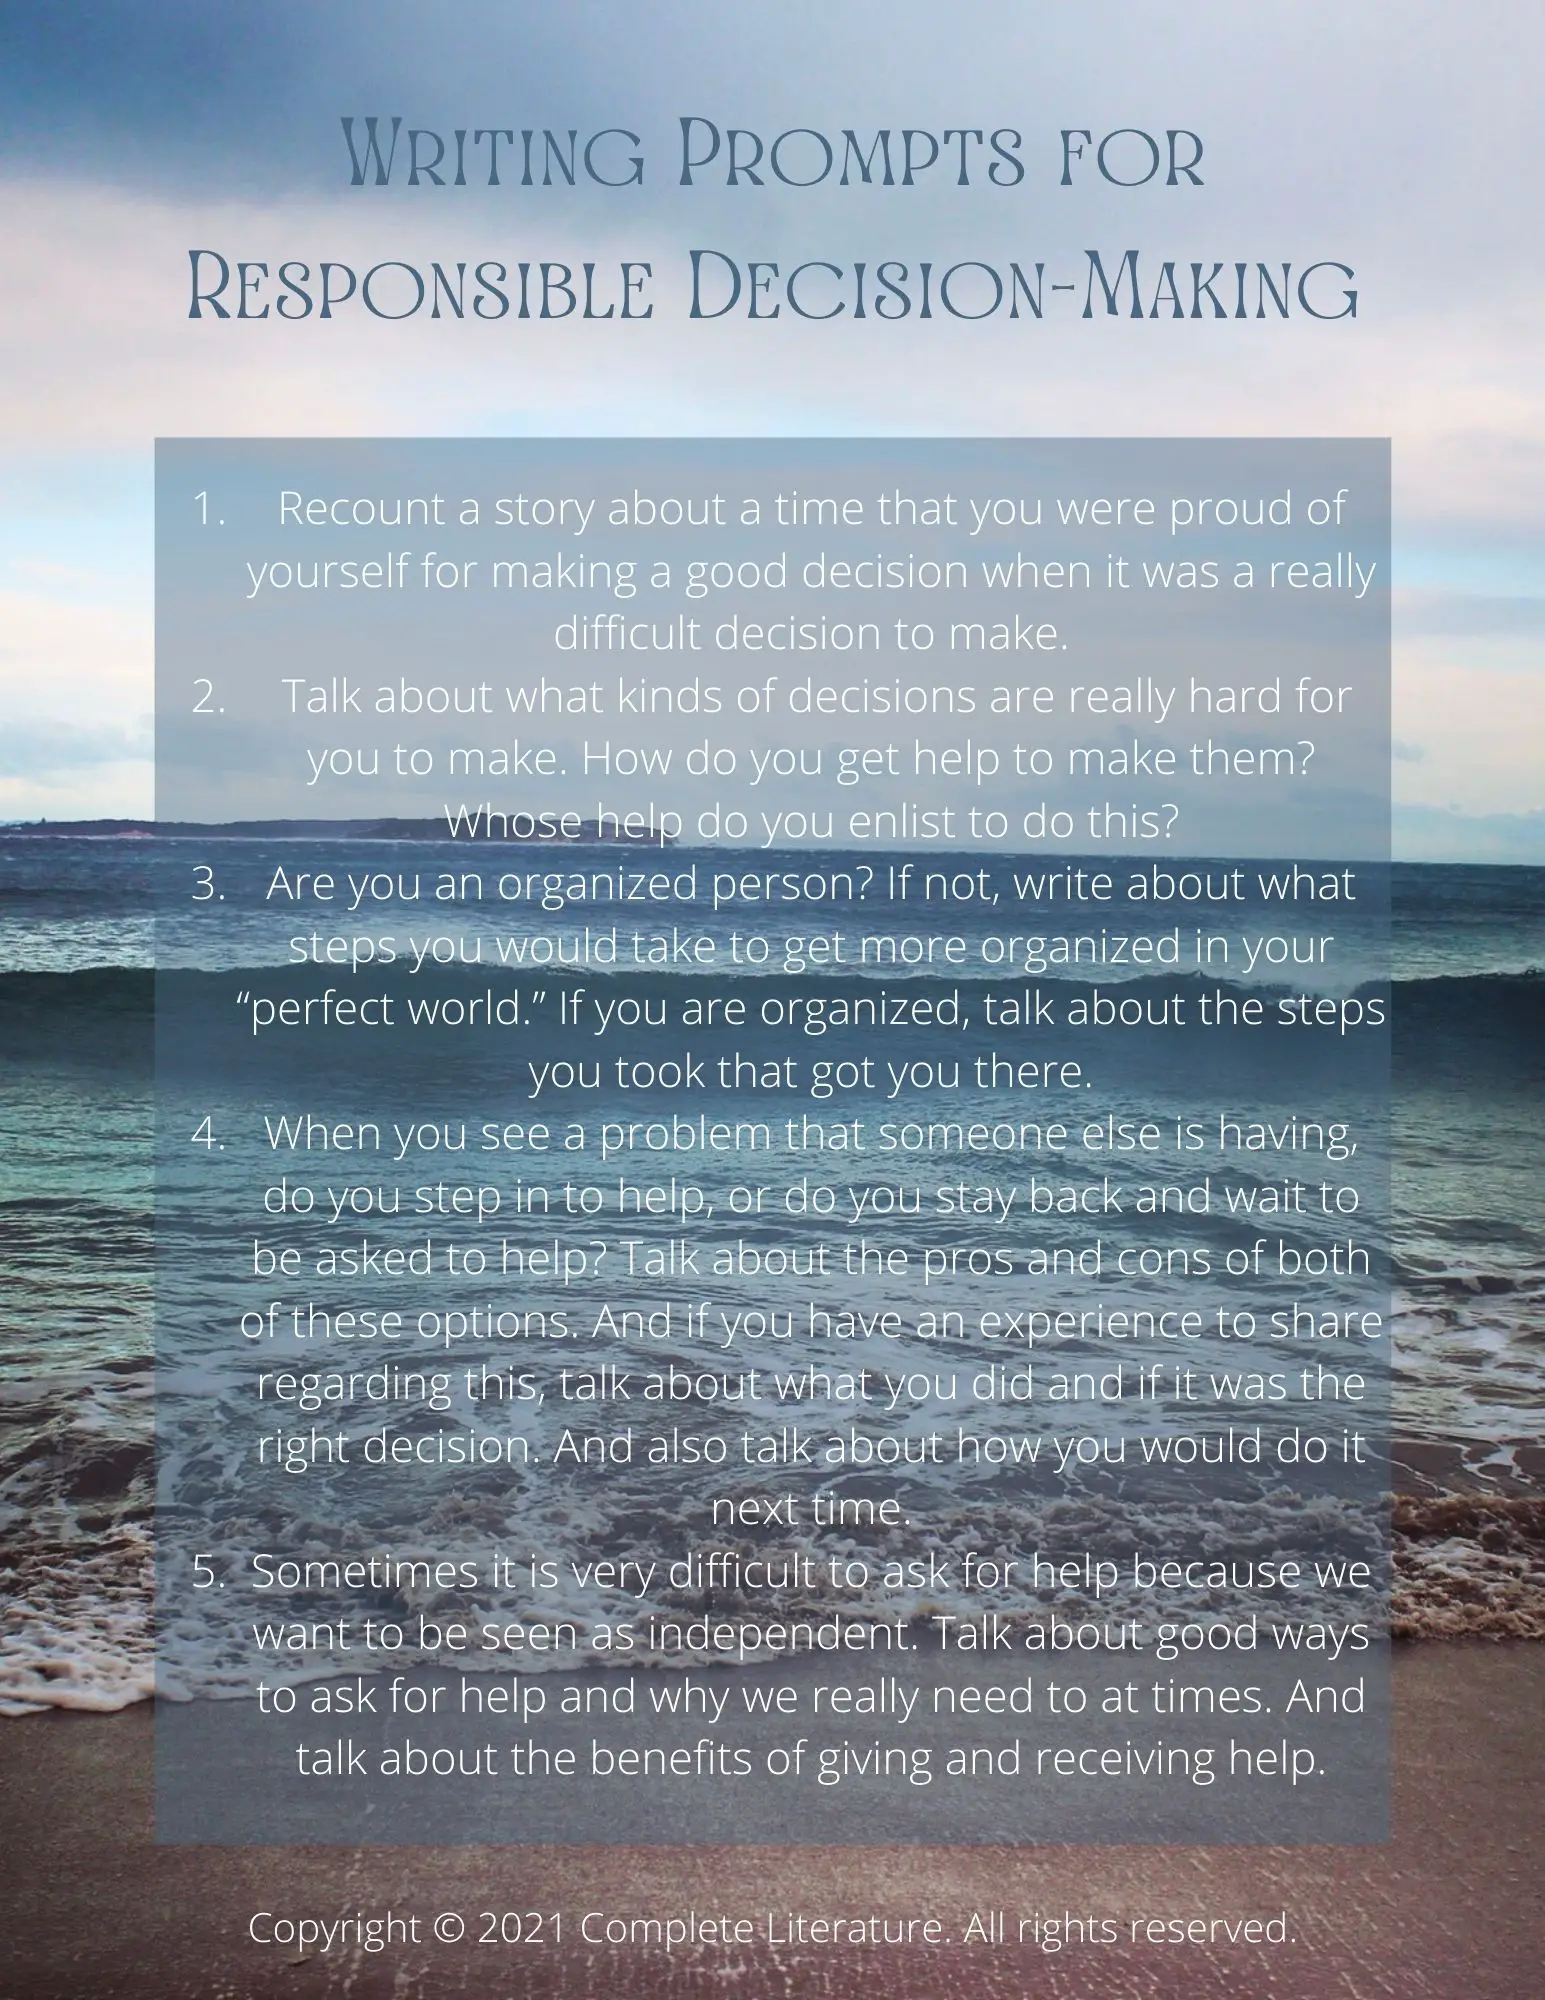 Writing Prompts for Responsible Decision-making